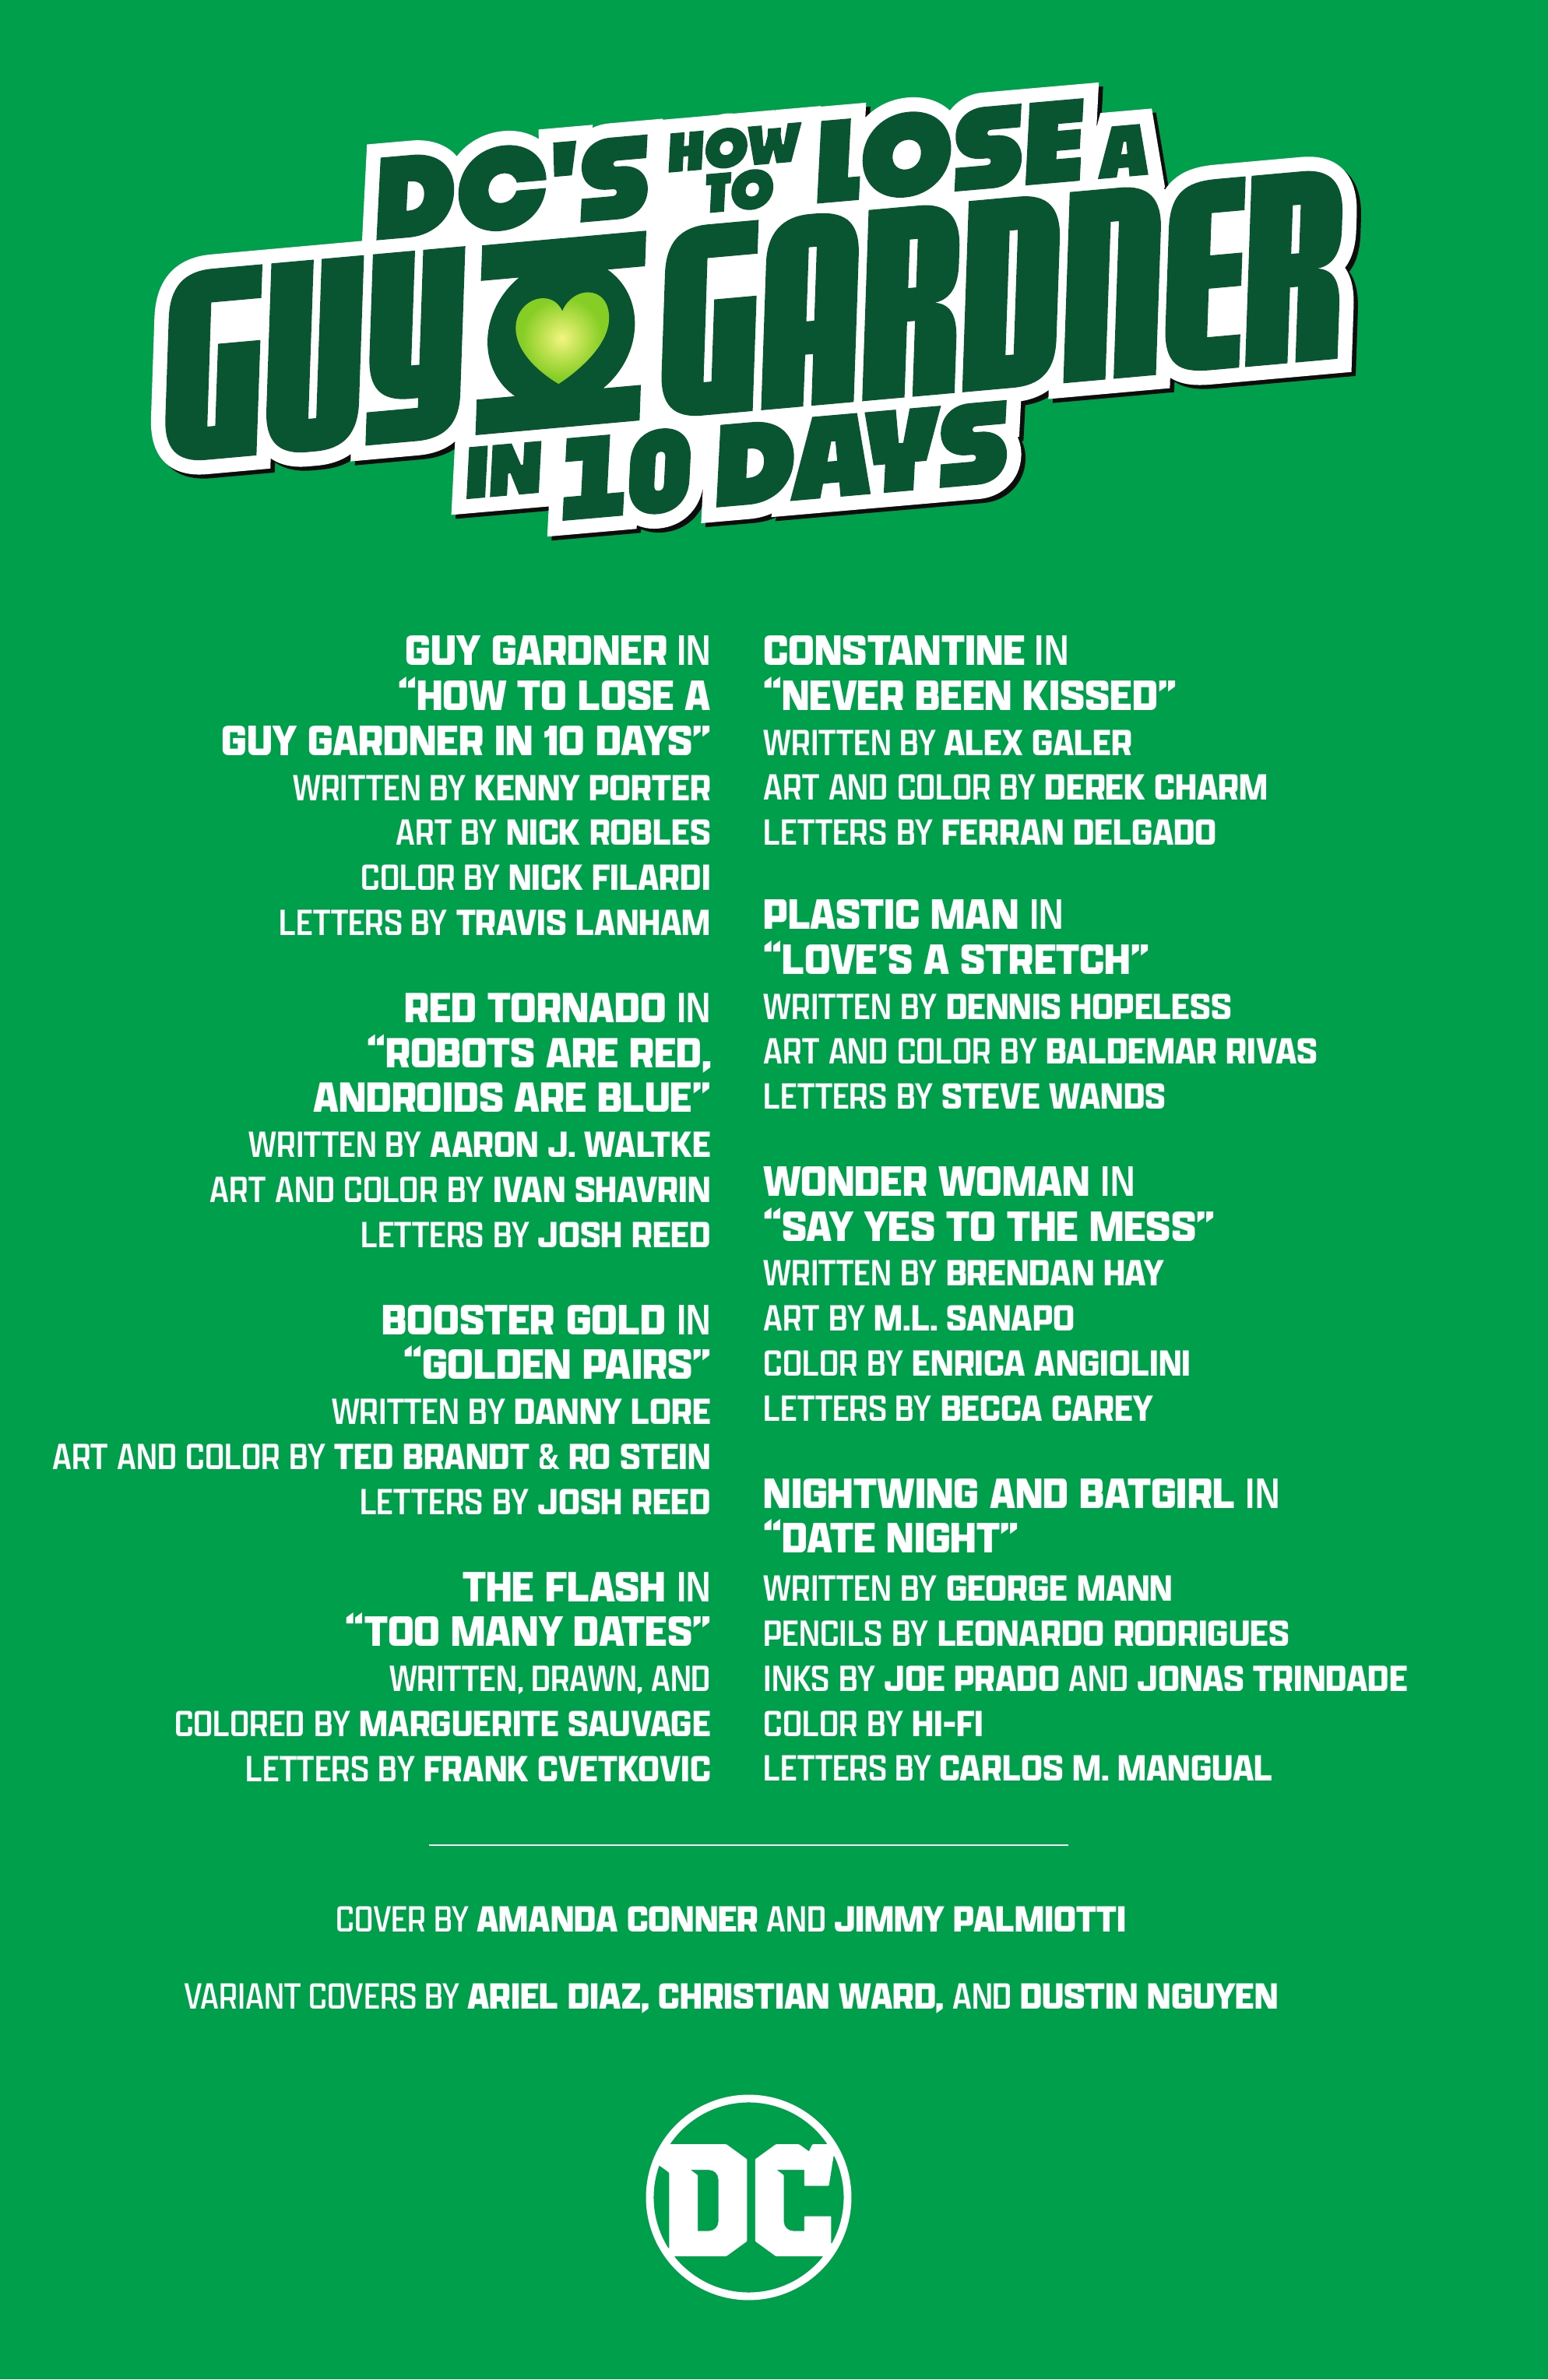 Read online DC's How to Lose a Guy Gardner in 10 Days comic -  Issue # TPB - 2